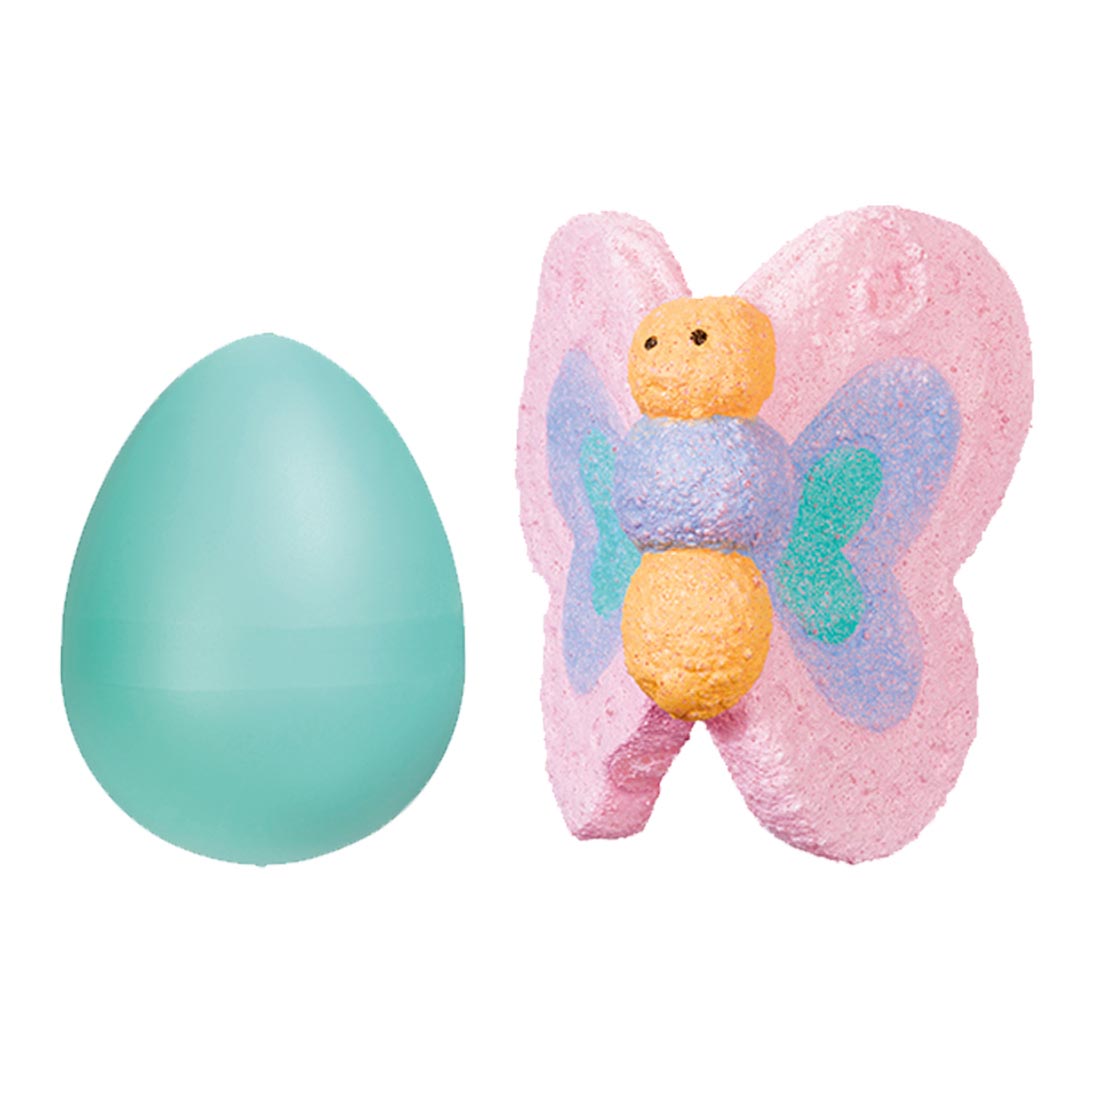 Hatchin' Grow Butterfly By Toysmith egg shown next to the fully hatched butterfly